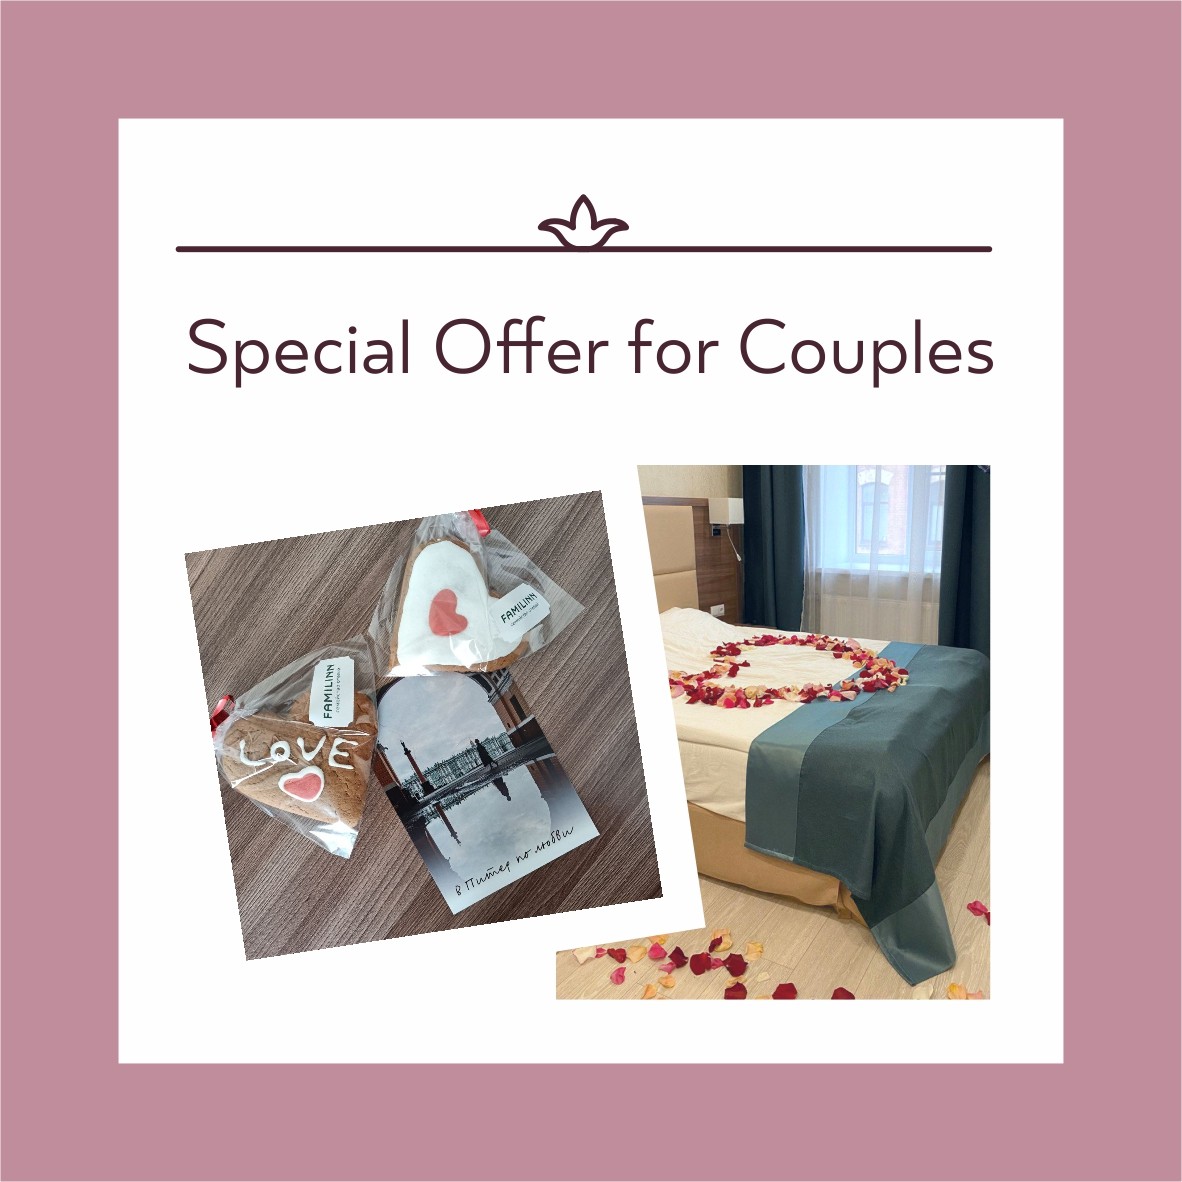 Special Offer for Couples